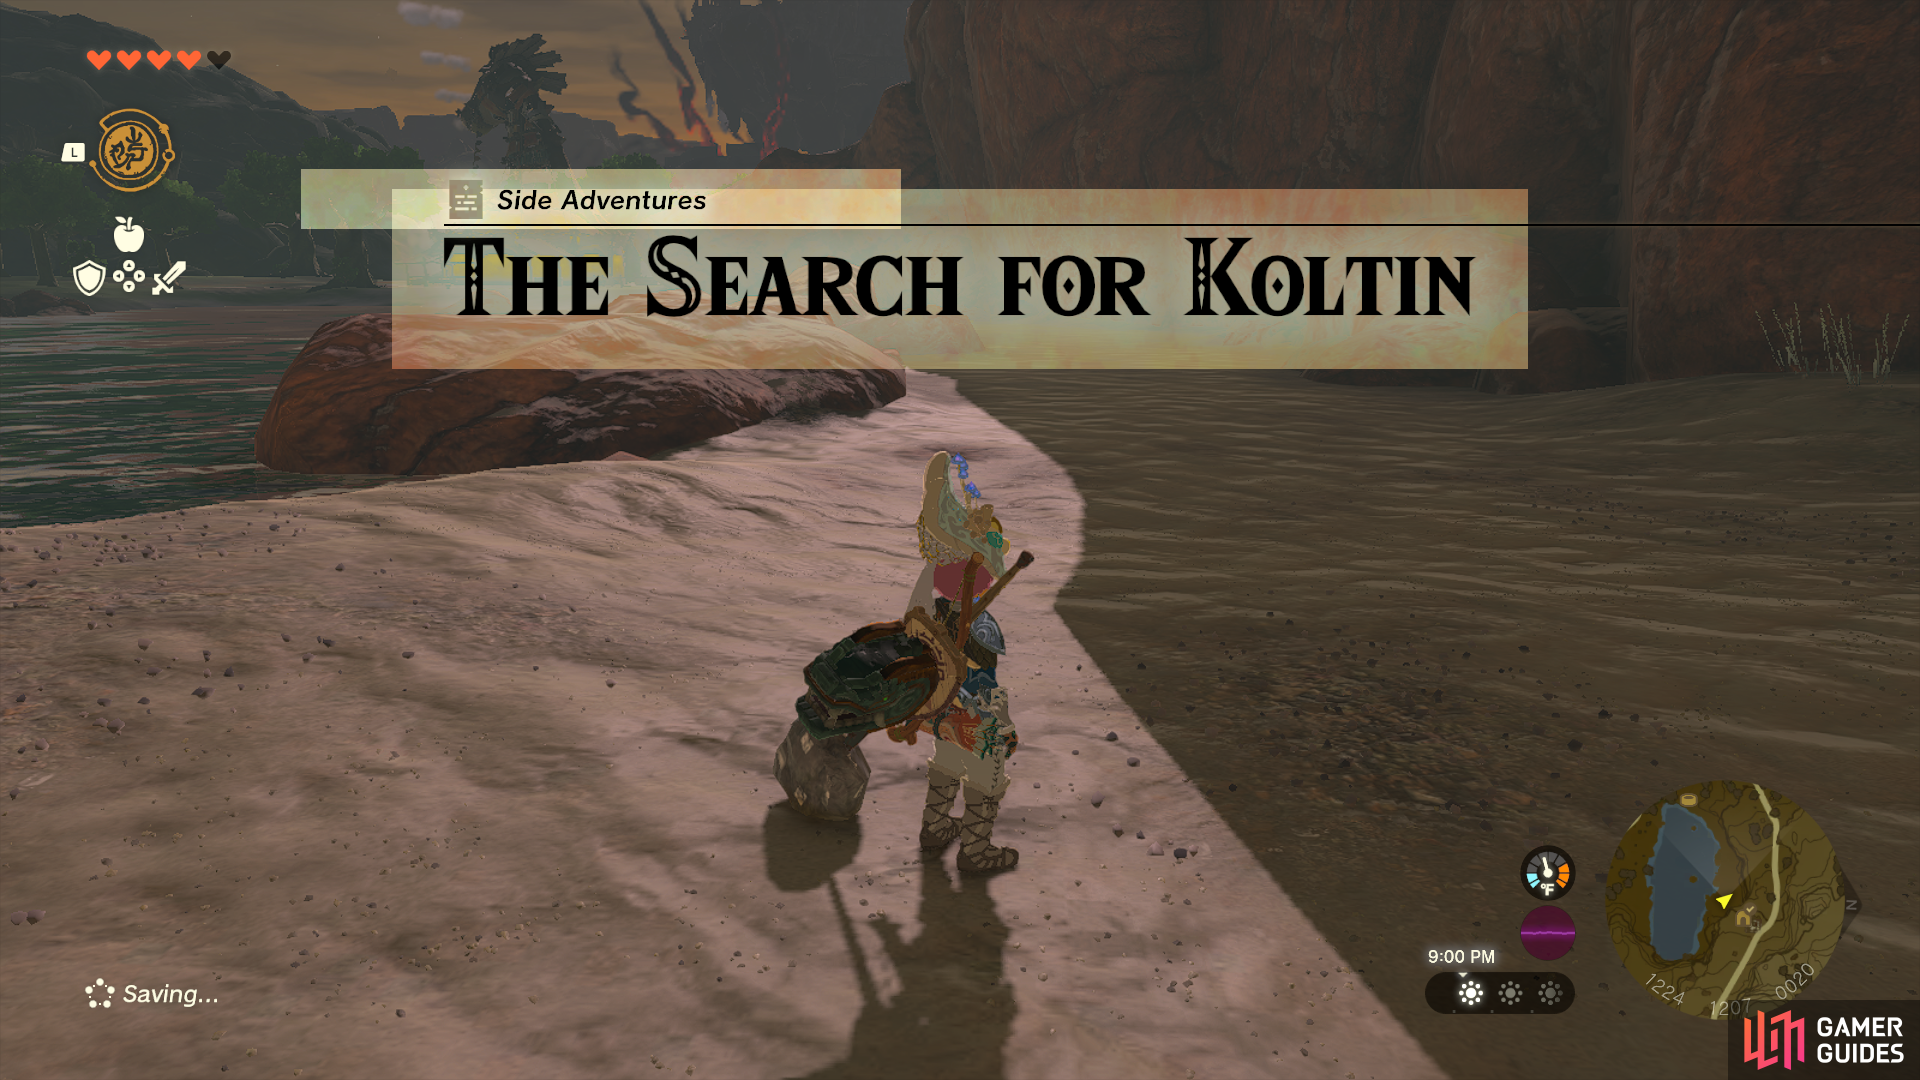 Starting The Search For Koltin quest near Pico Pond.